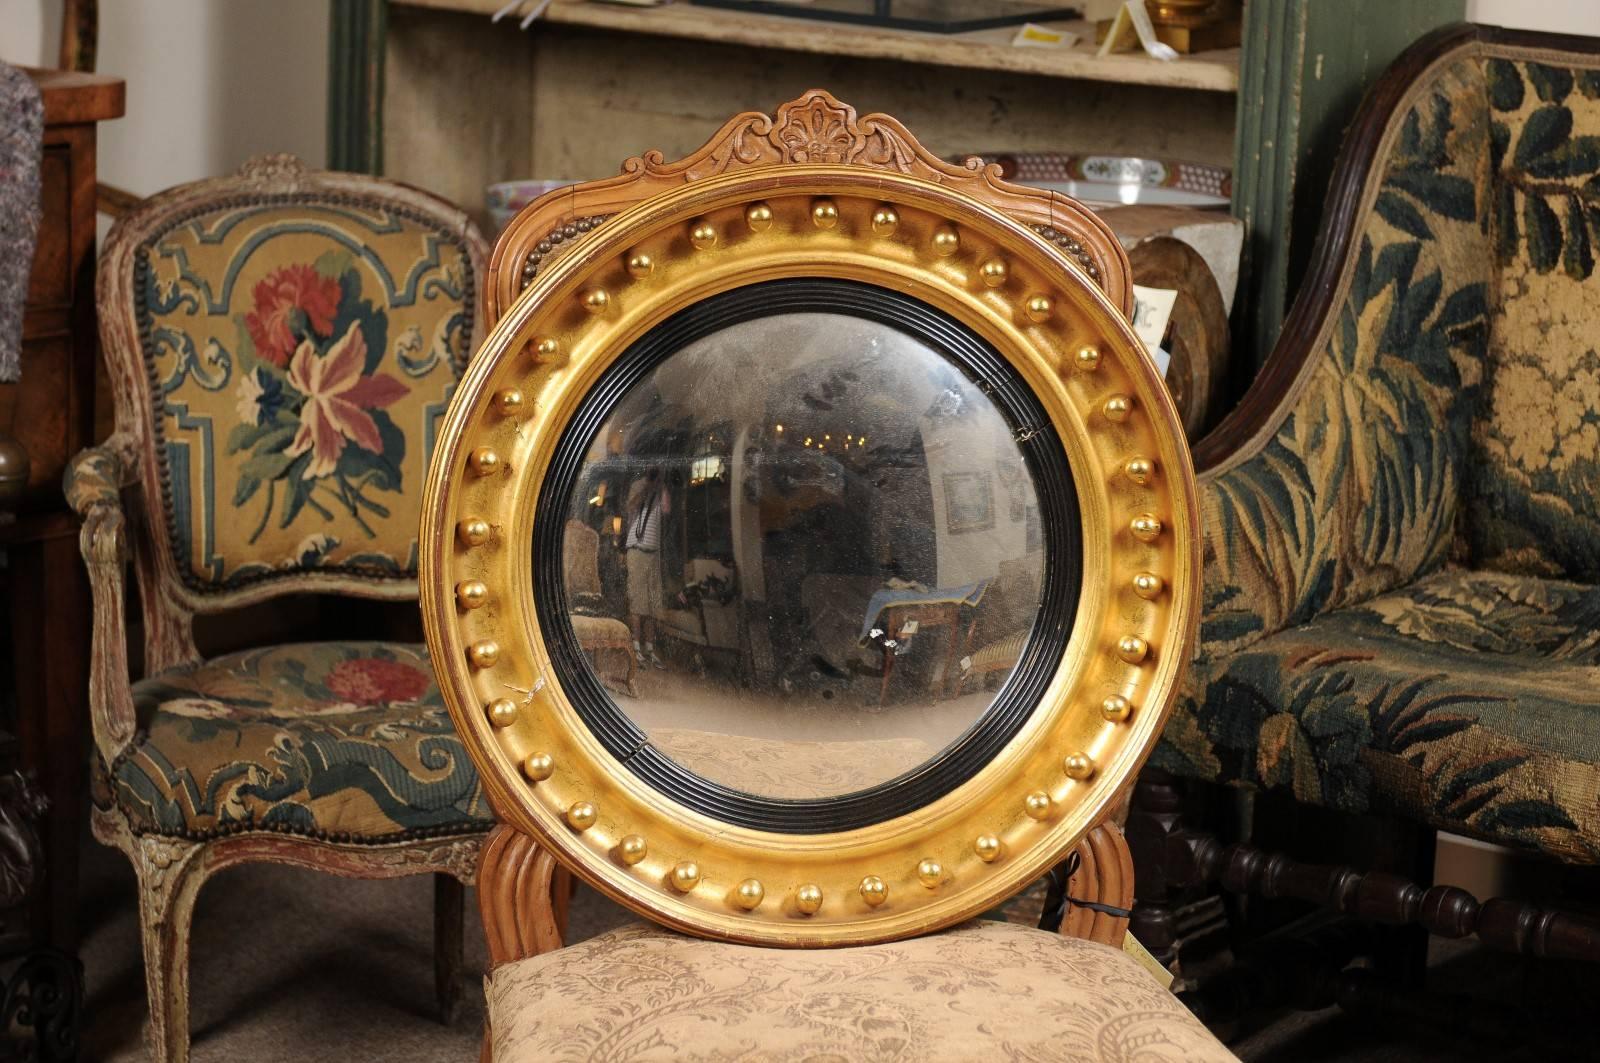 Giltwood bullseye mirror with convex mirror glass featuring gilt orbs around the outer perimeter and ebonized, ribbed detail, England, 19th century.